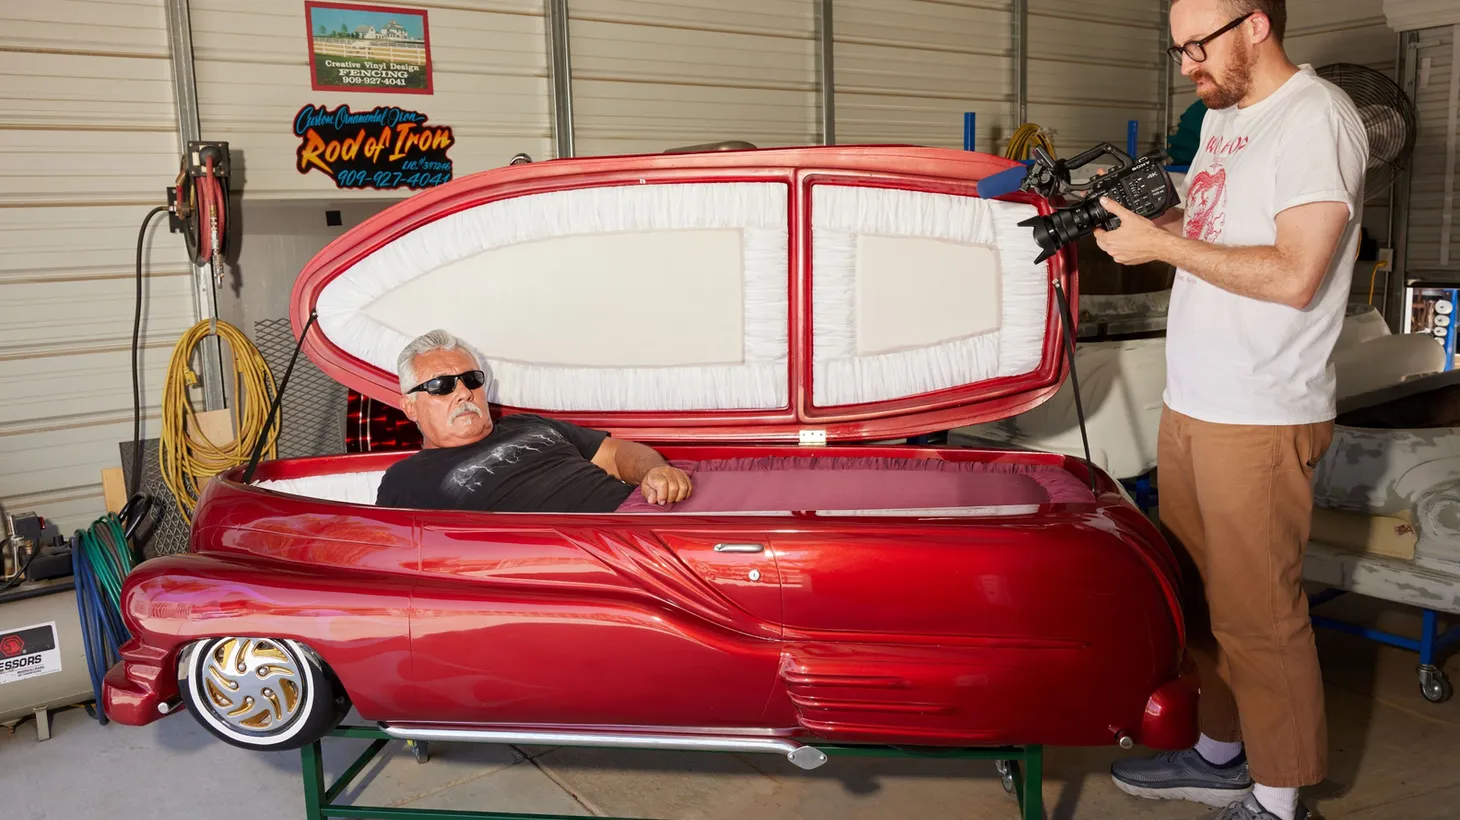 John Wilson interviews the owner of Cruisin Caskets in the episode called “How to Find a Spot.”